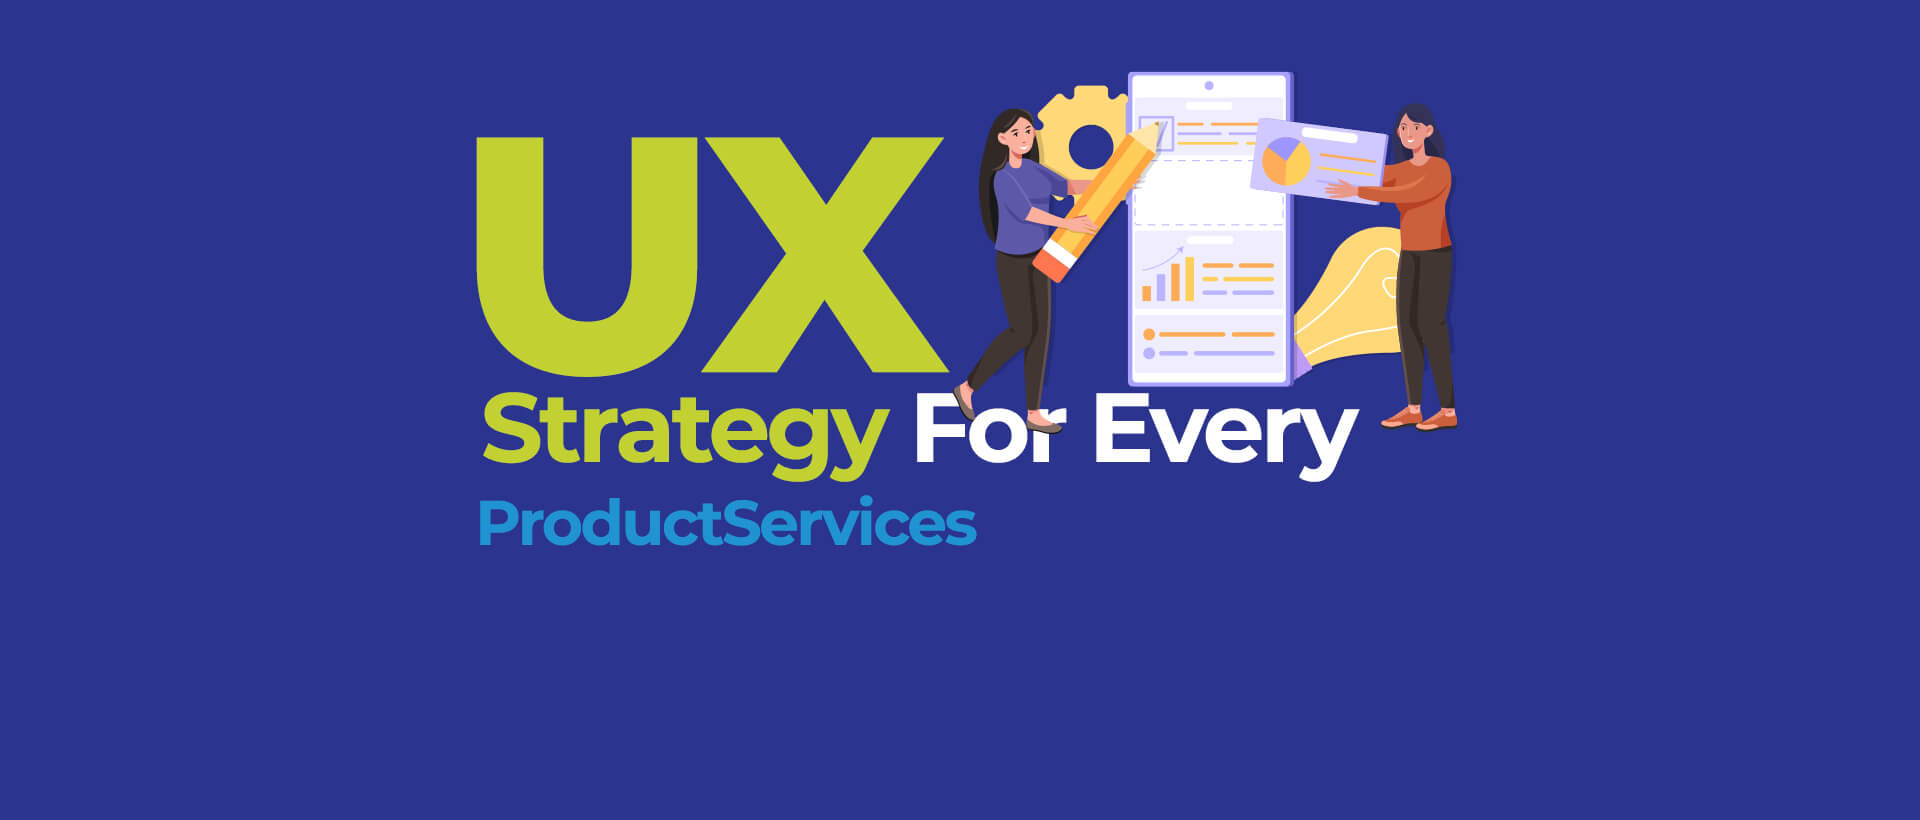 UX Strategy for Every Product/Services